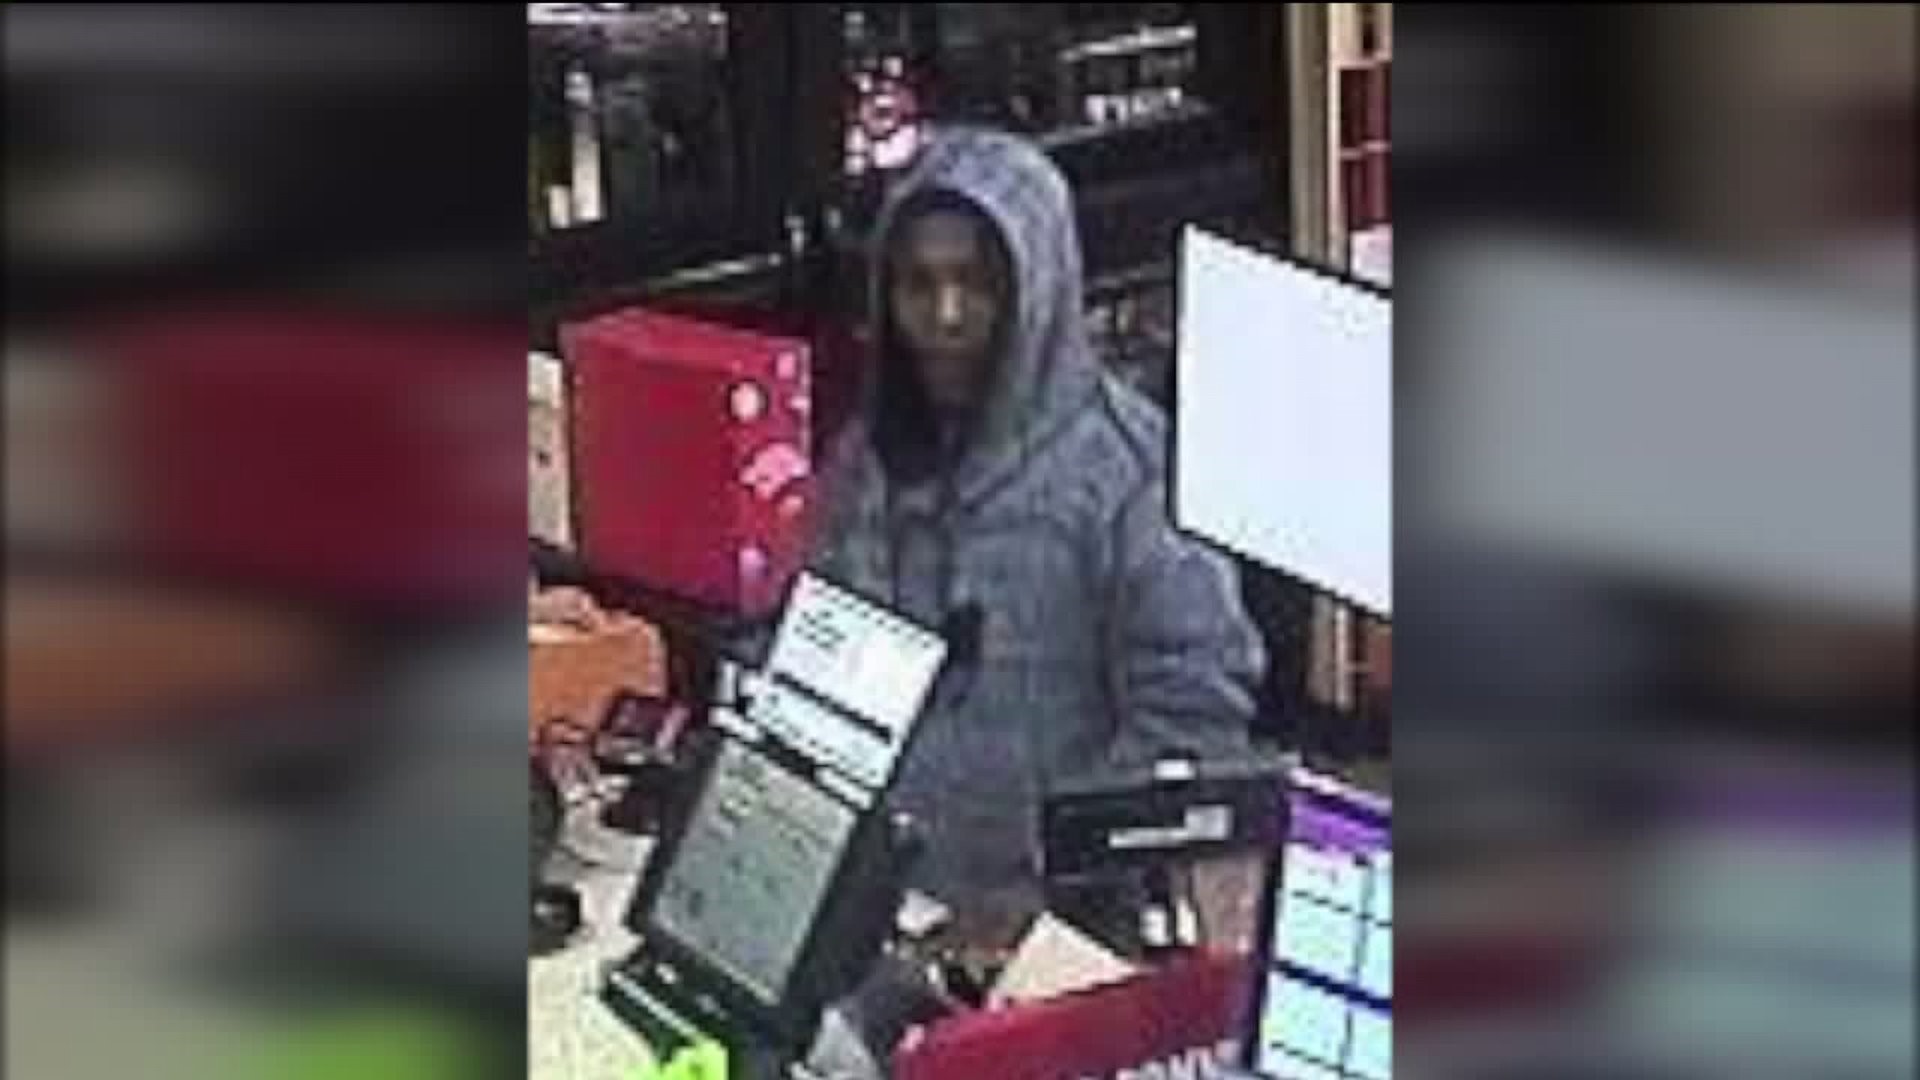 Sheetz Robbed in Wilkes-Barre